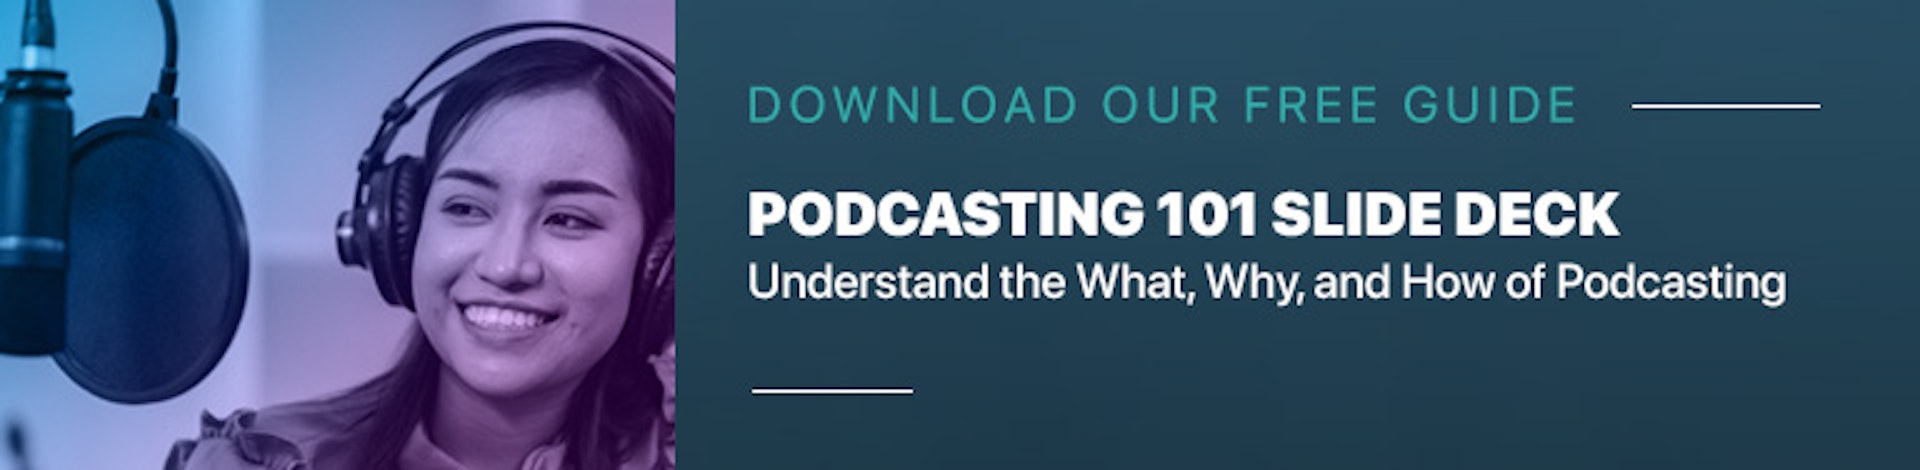 Download the Podcasting 101 Slide Deck from The Podcast Consultant